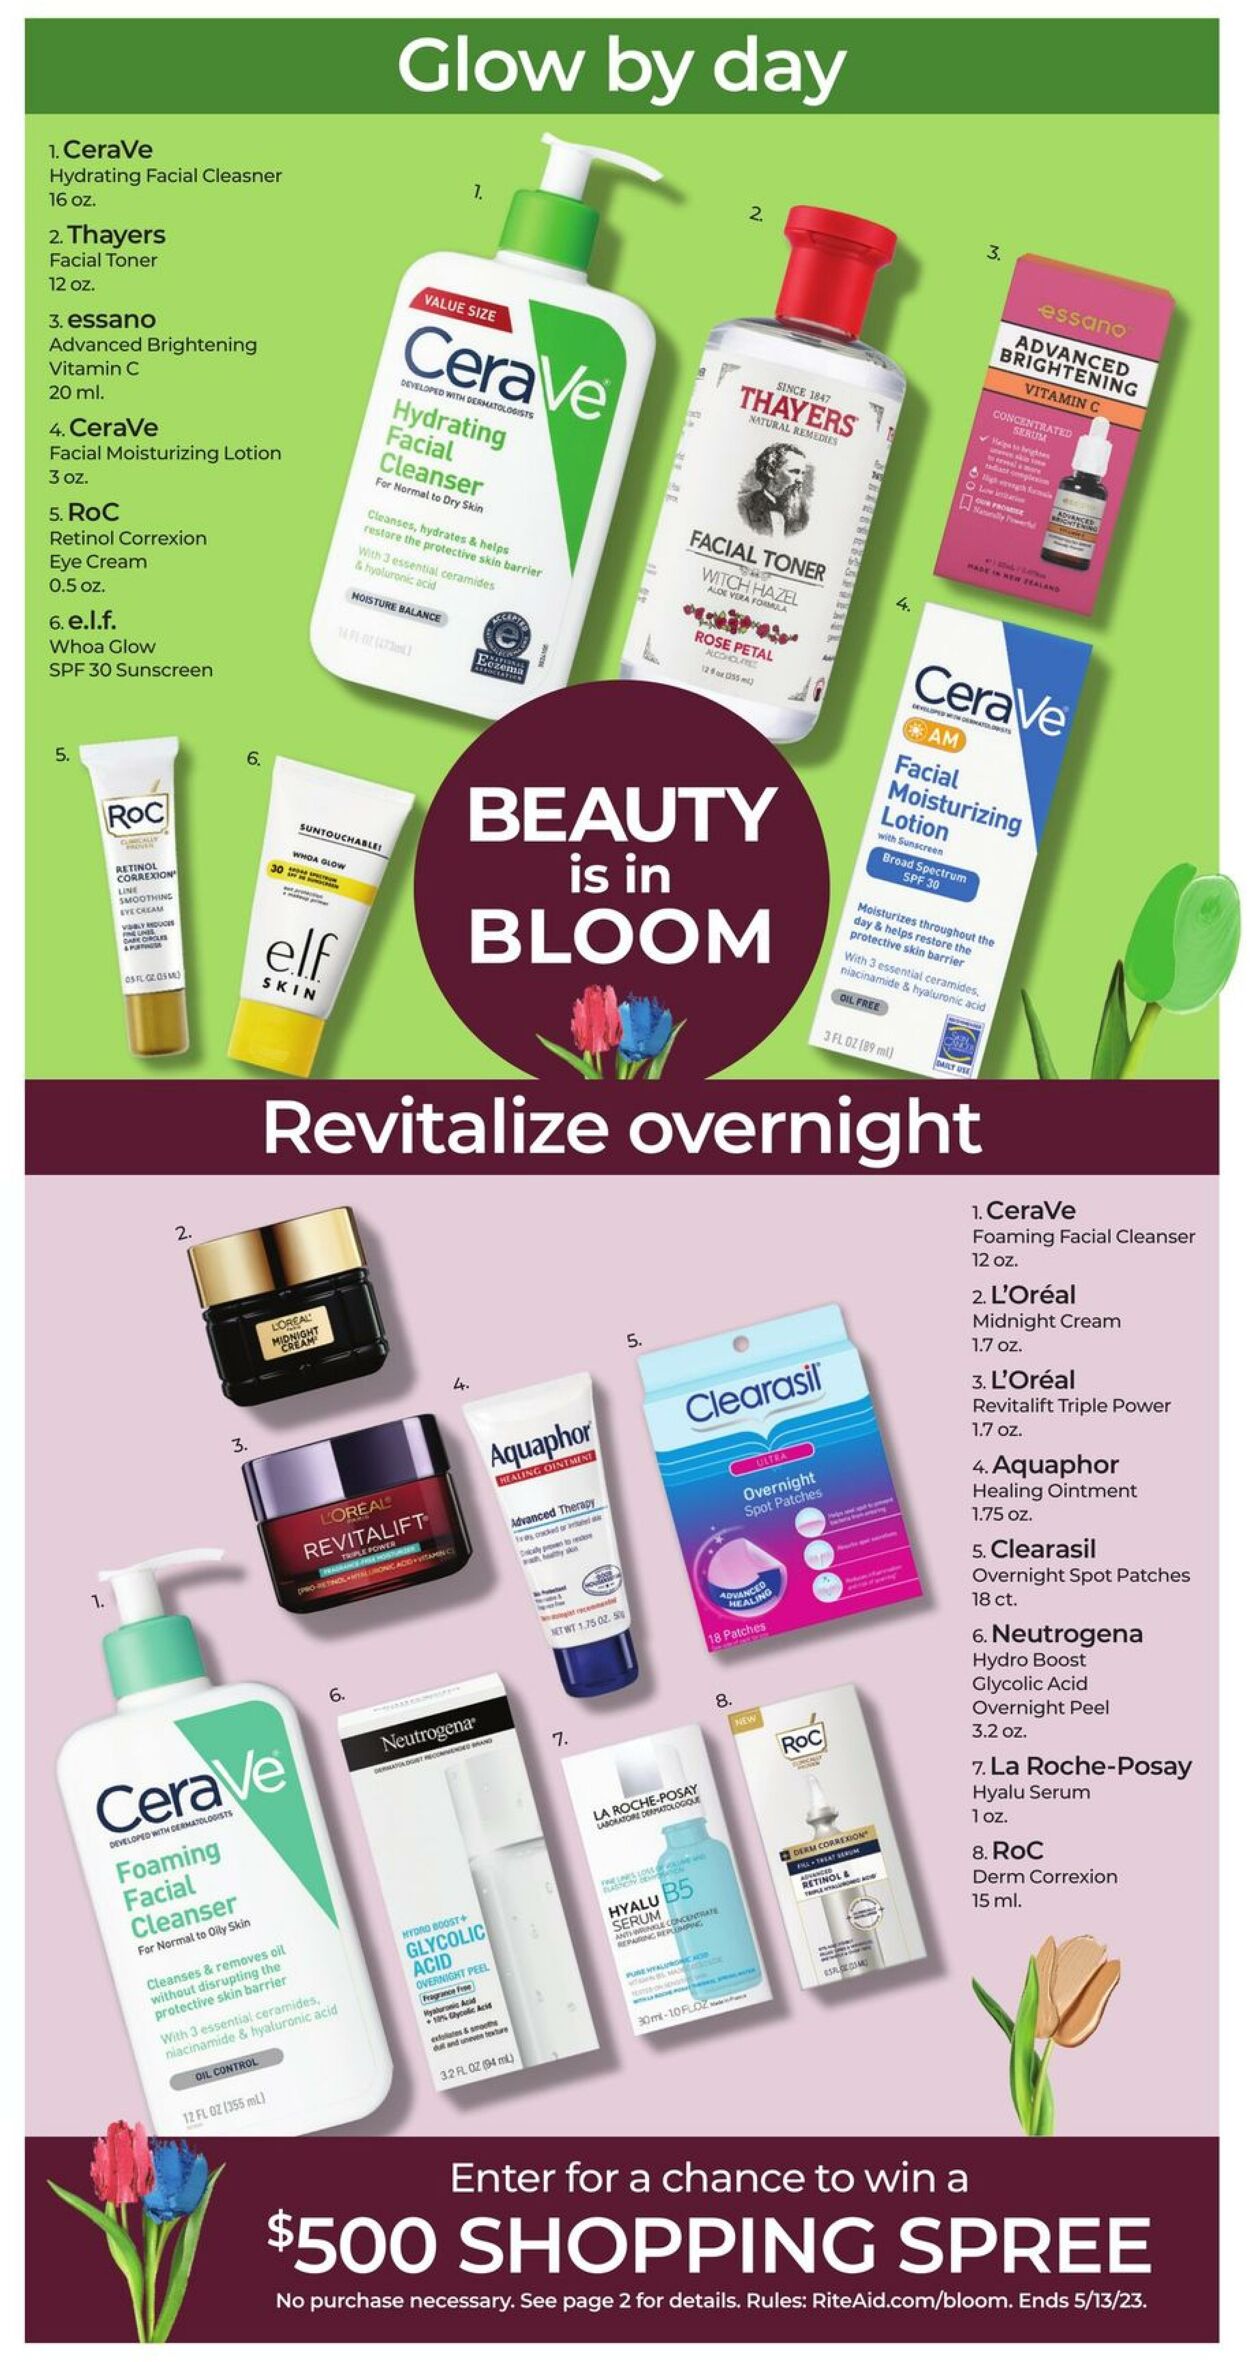 Weekly ad Rite Aid 04/30/2023 - 05/06/2023